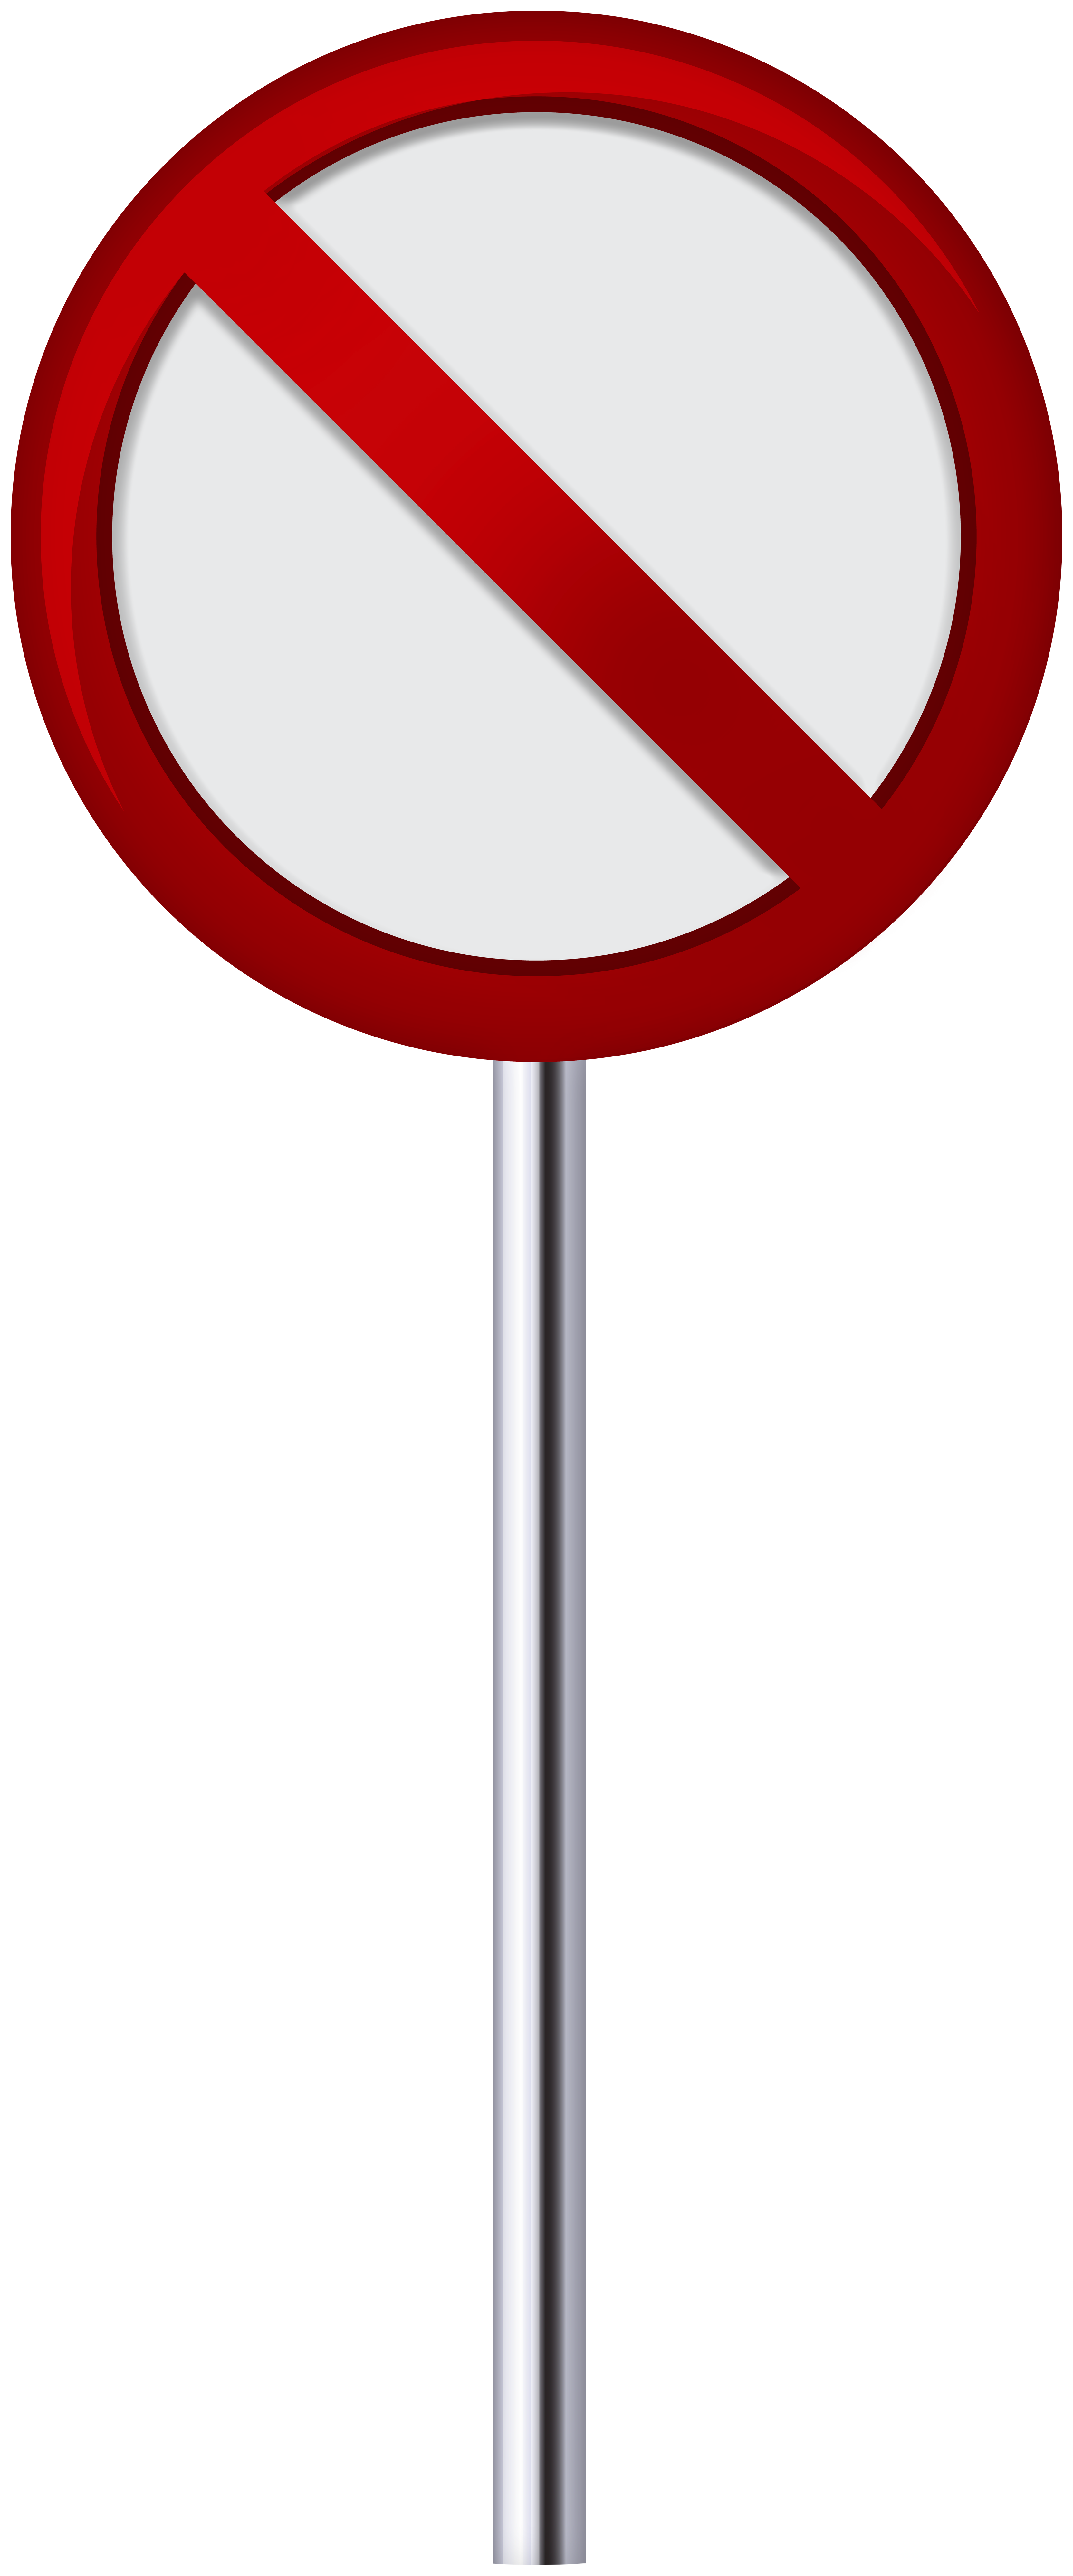 highway sign png